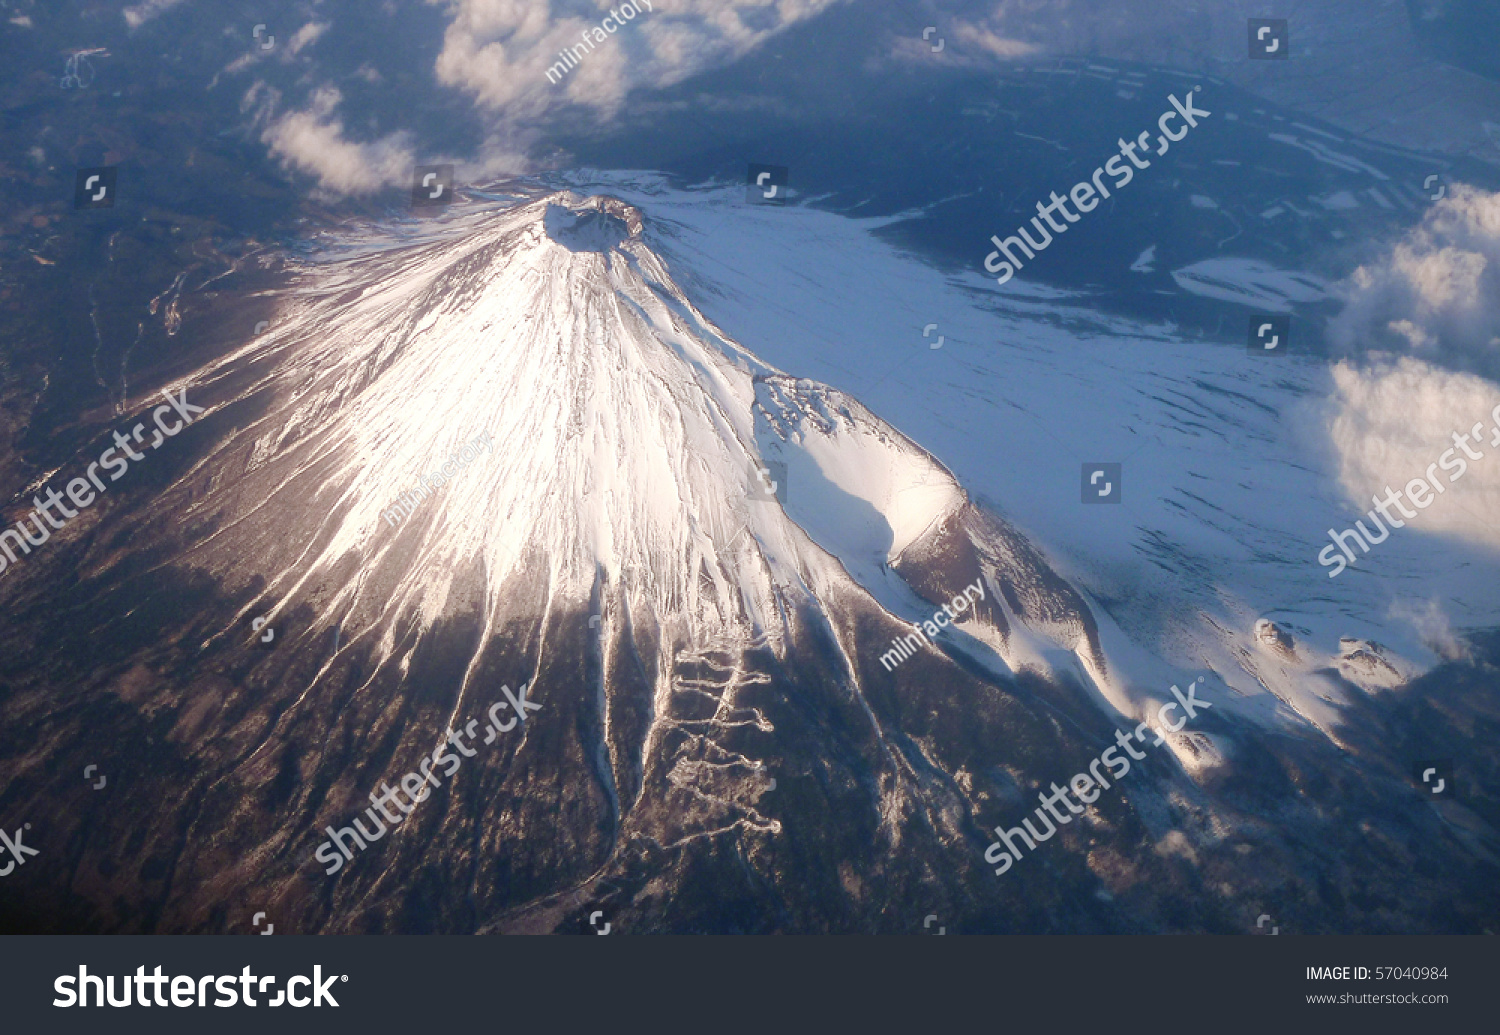 Bird'S Eye View Of The Mouth Of The Volcano Stock Photo 57040984 ...